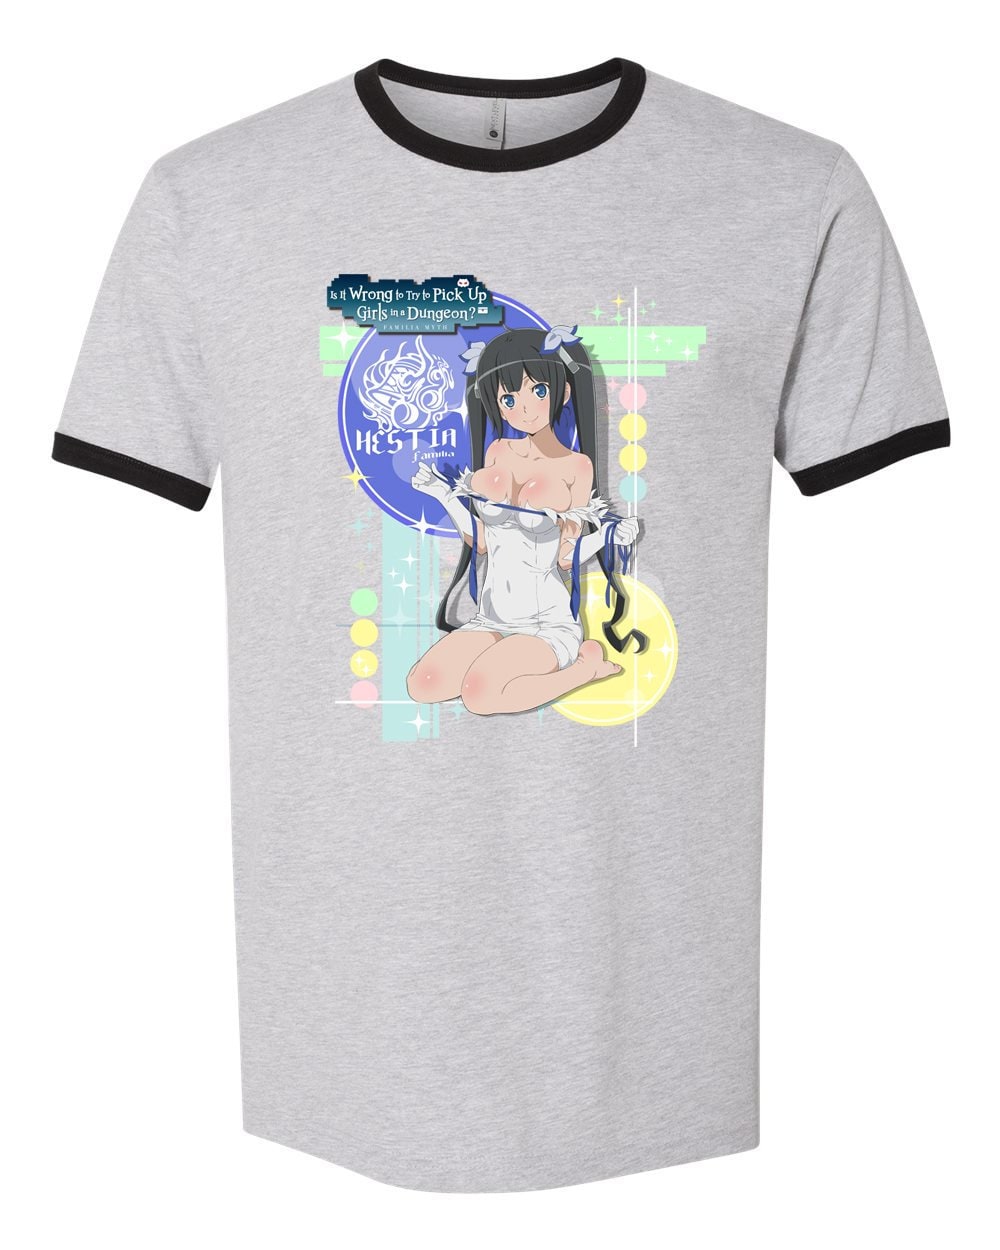 Main Characters from Danmachi Season 4 or Is It Wrong to Try or Dungeon ni  Deai Anime in Vintage Pop Art : Bell, Hestia, T-Shirt - AliExpress